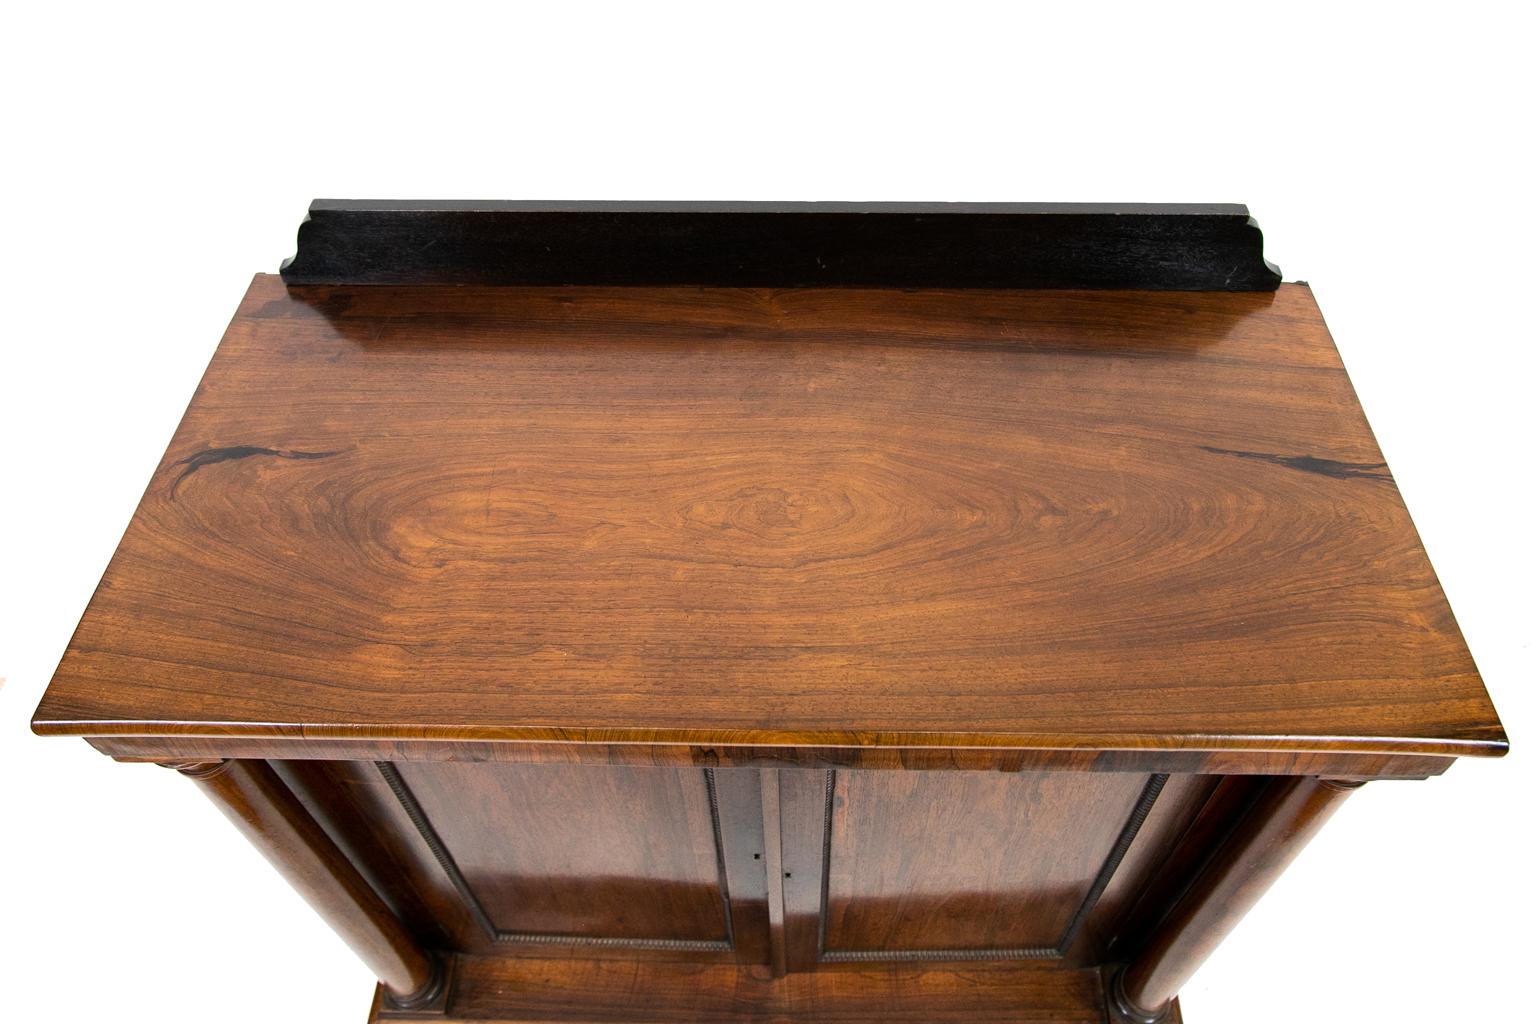 English rosewood console cabinet, has freestanding rosewood columns, while the doors have beaded molding. The feet are carved with reeding.
 